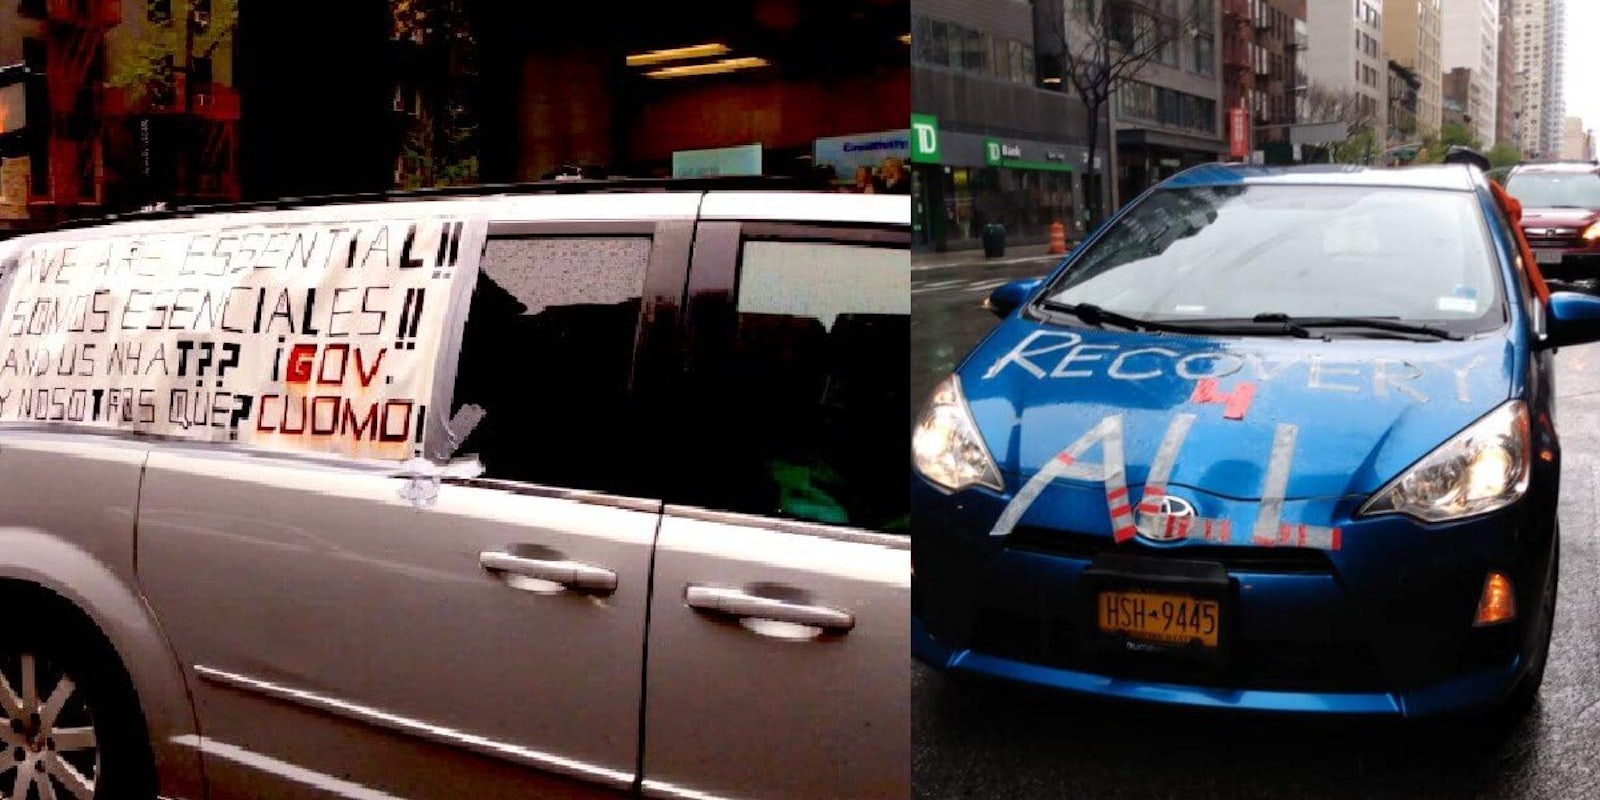 Photos show posters marked on cars protesting the stimulus package that leave out undocumented, essential workers